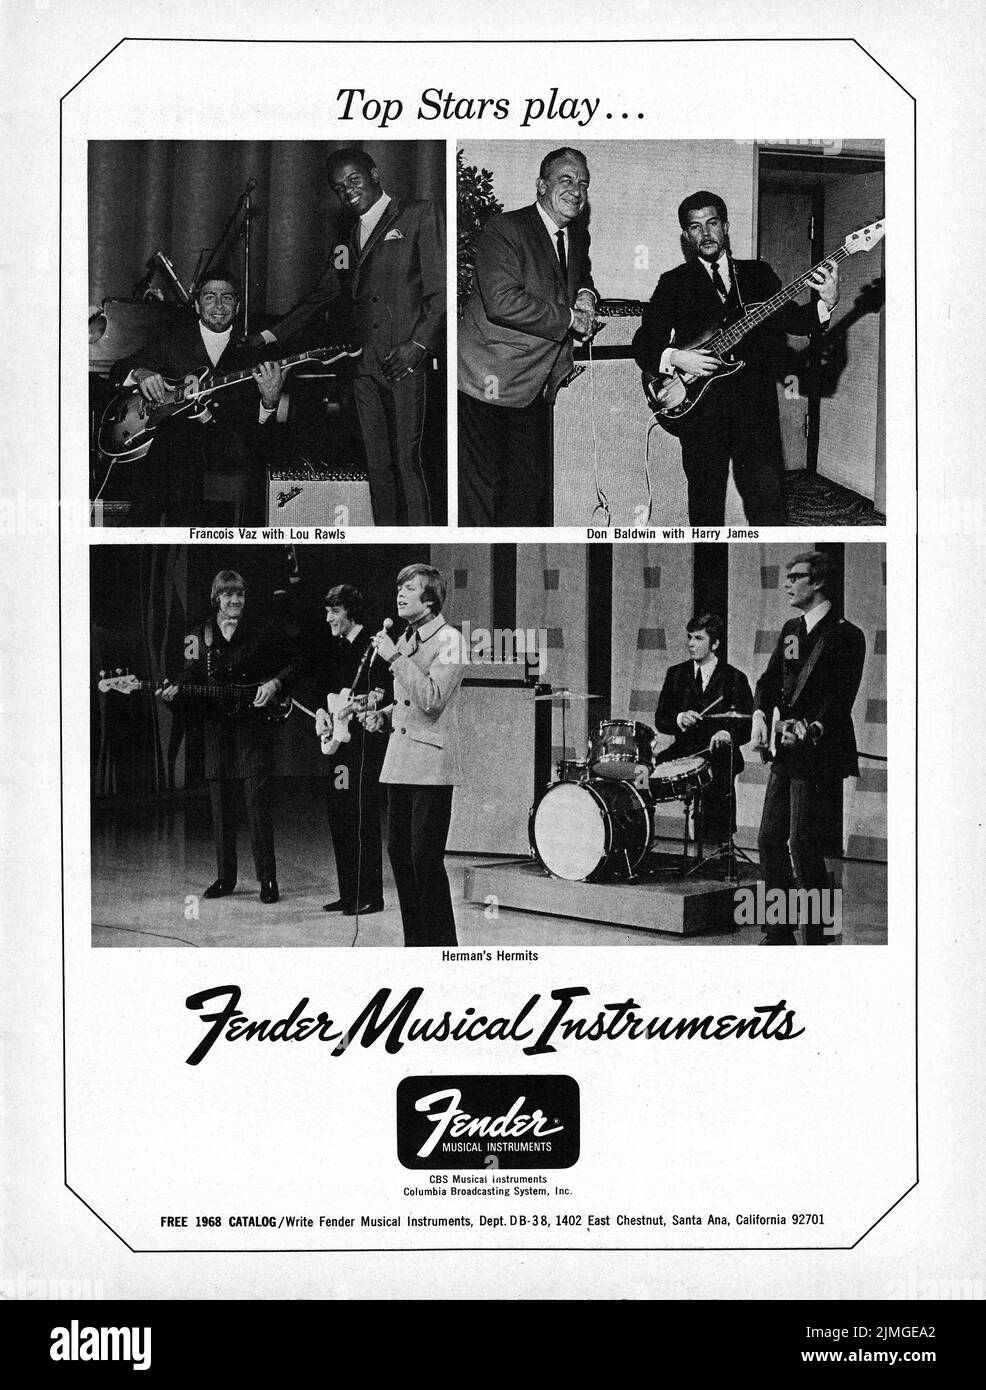 A Fender guitar ad from a 1962 music magazine showing that top stars play Fender instruments. The ad features Lou Rawls, Harry James & Herman's Hermits. Stock Photo